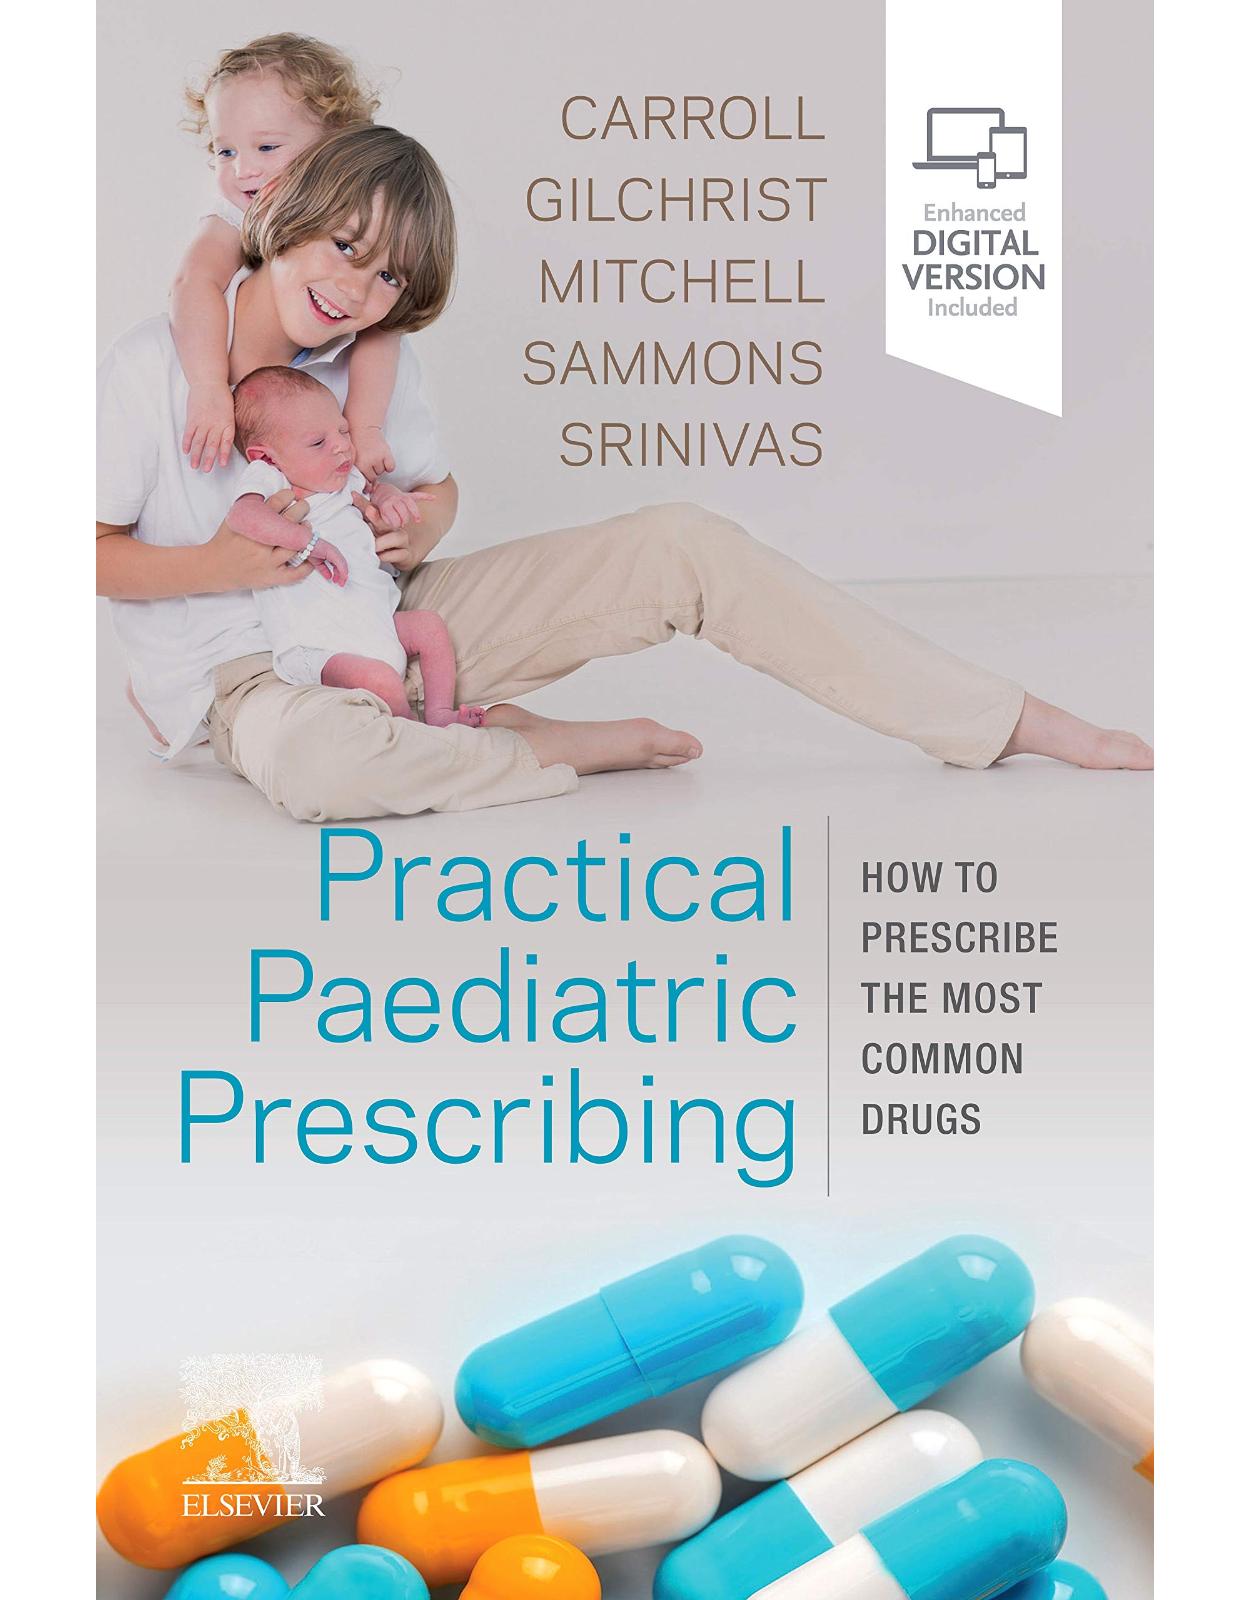 Practical Paediatric Prescribing: How to Prescribe the Most Common Drugs